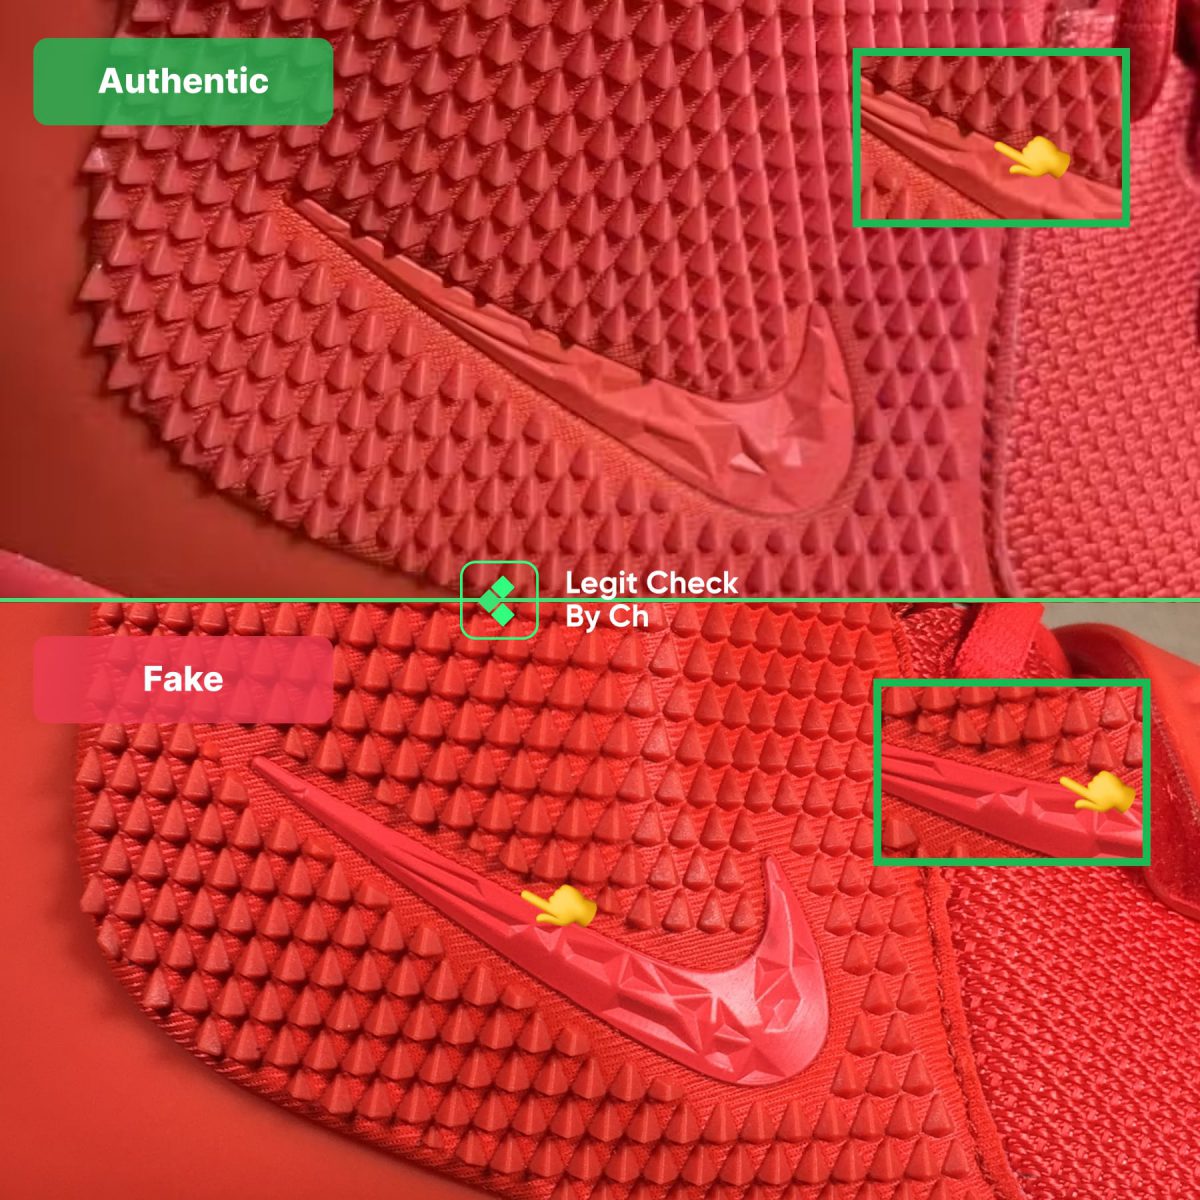 Authentic vs fake Yeezy Red October Comparison: Nike Logo